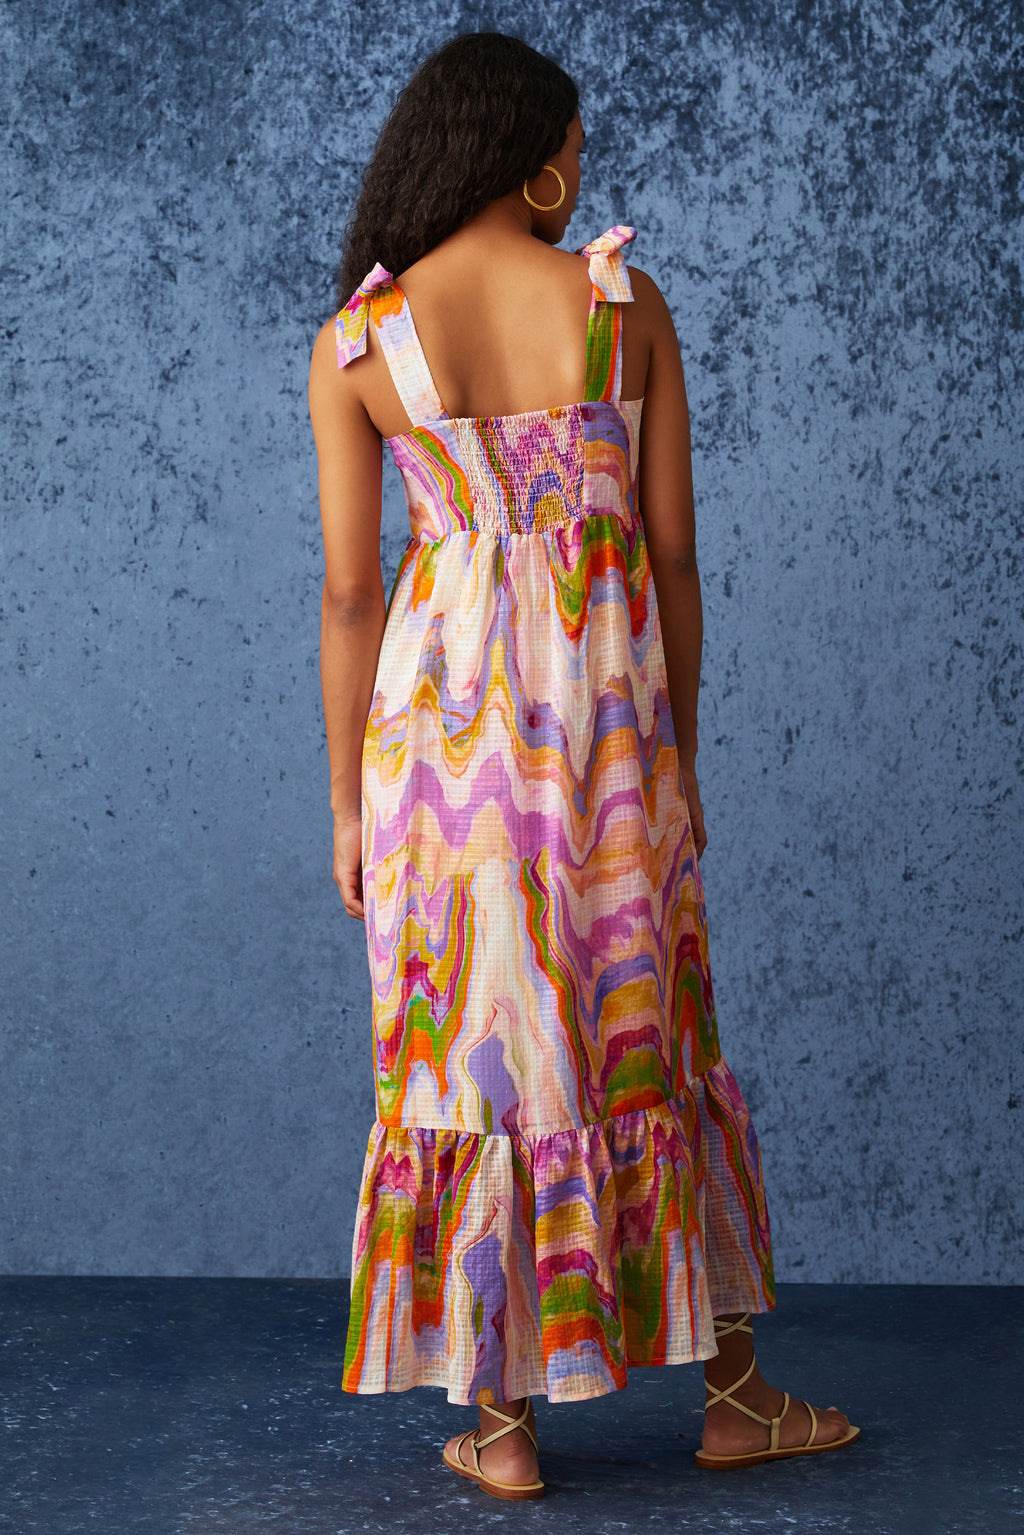 Maxi dress with thick straps that tie at the top of the shoulder